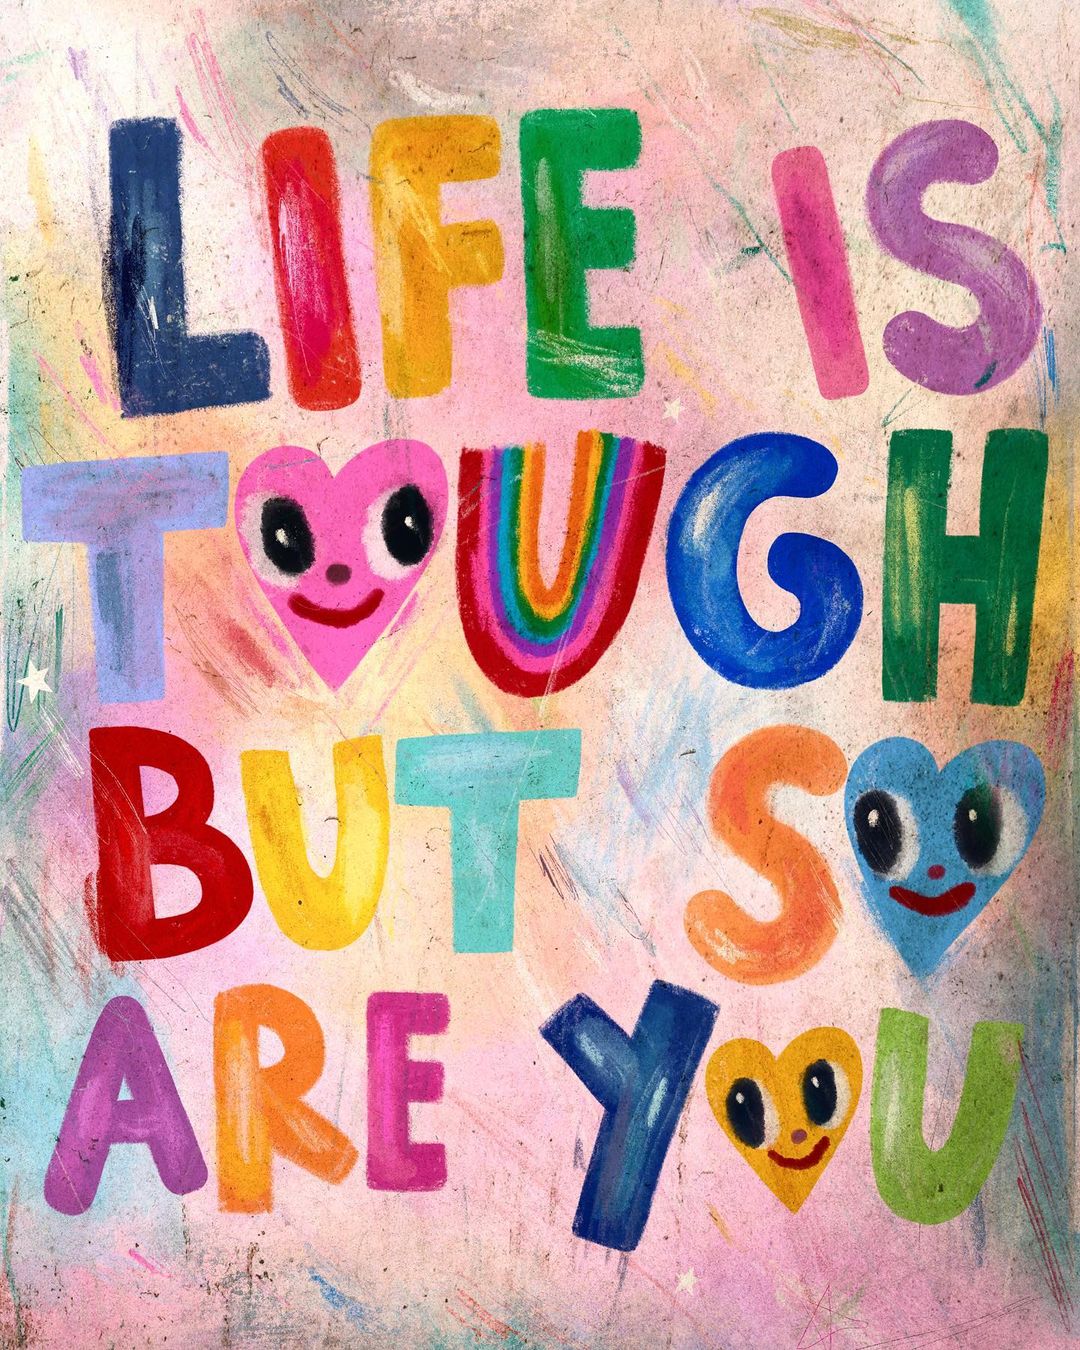 Art by iscreamcolor. Colorful letters spell out, in all caps, "Life is tough but so are you."